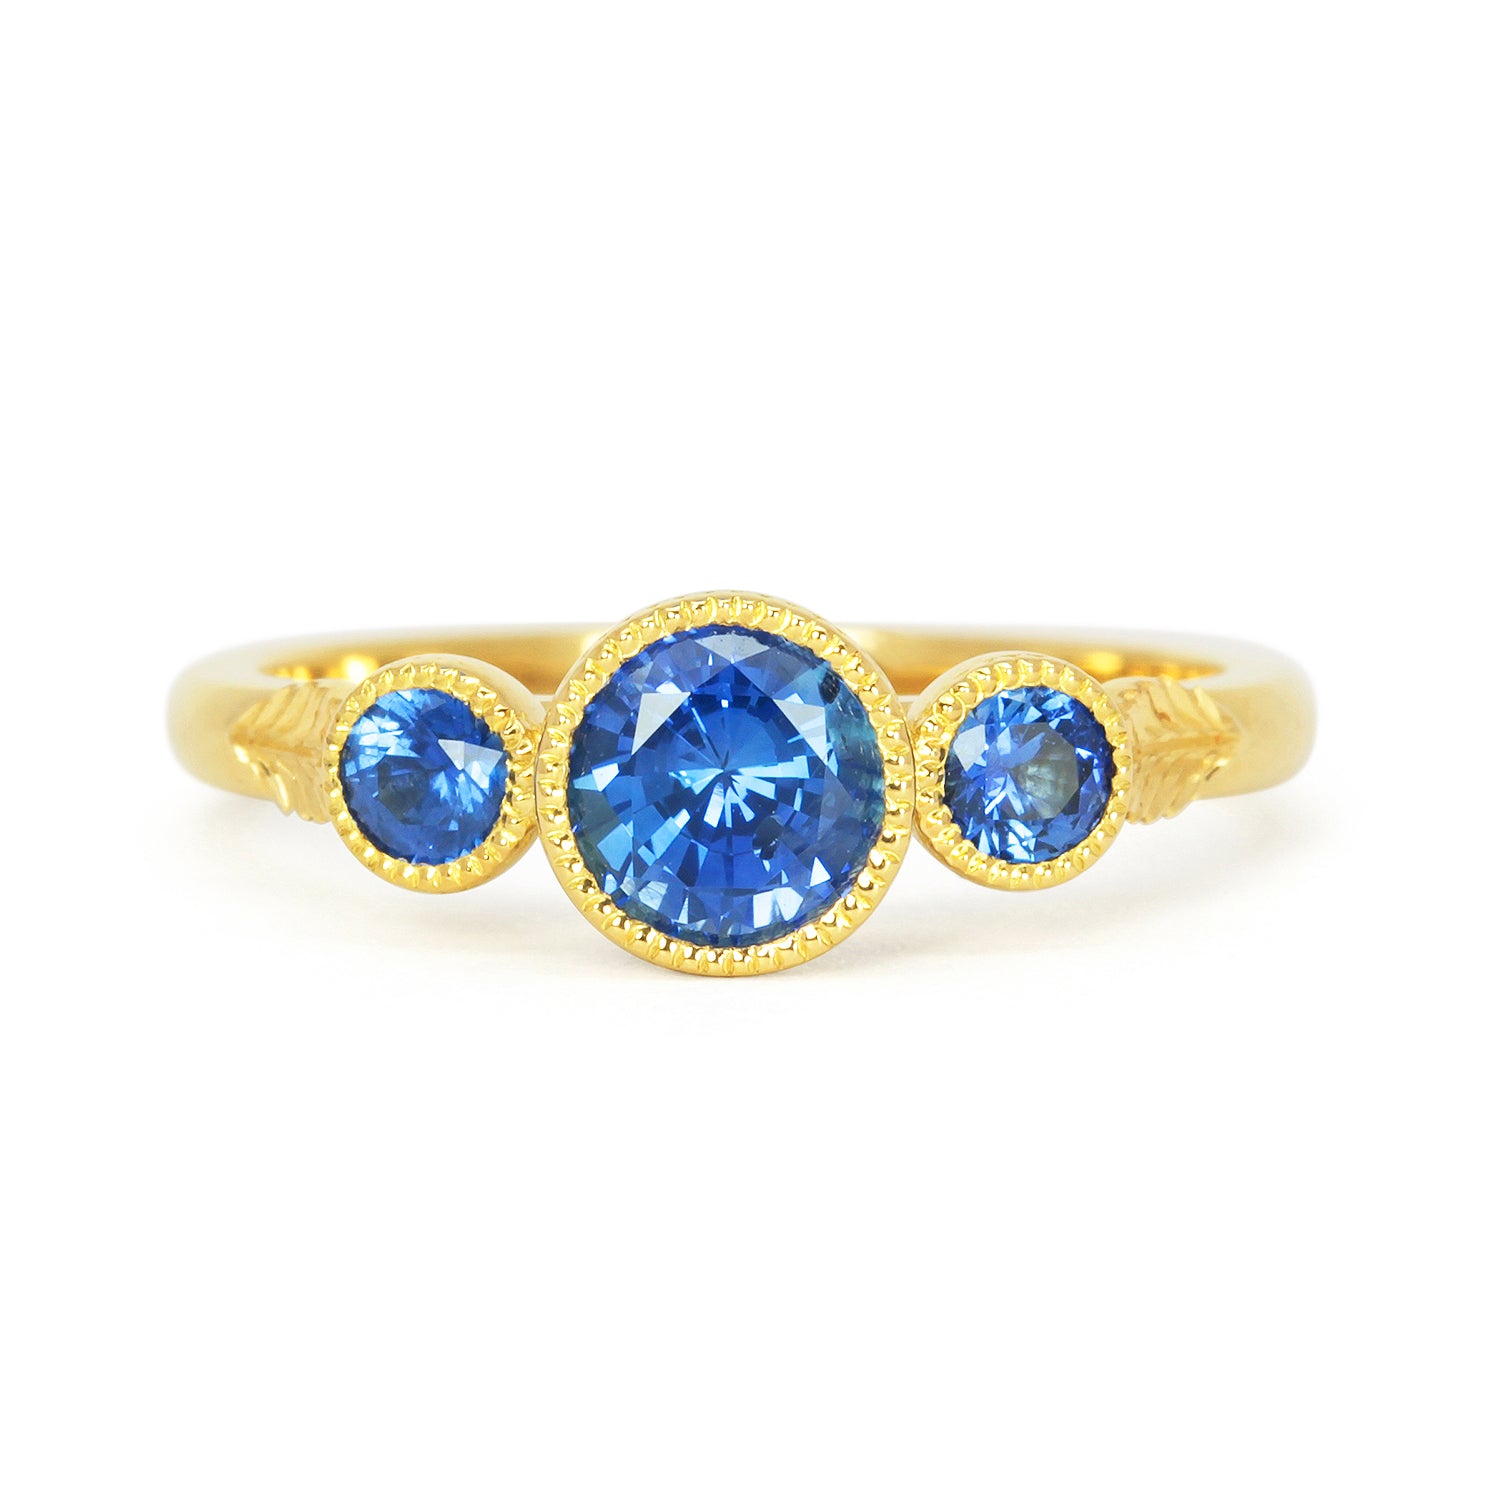 Bespoke ethical sapphire trilogy engagement ring, 18ct recycled yellow gold and traceable Sri Lankan sapphires